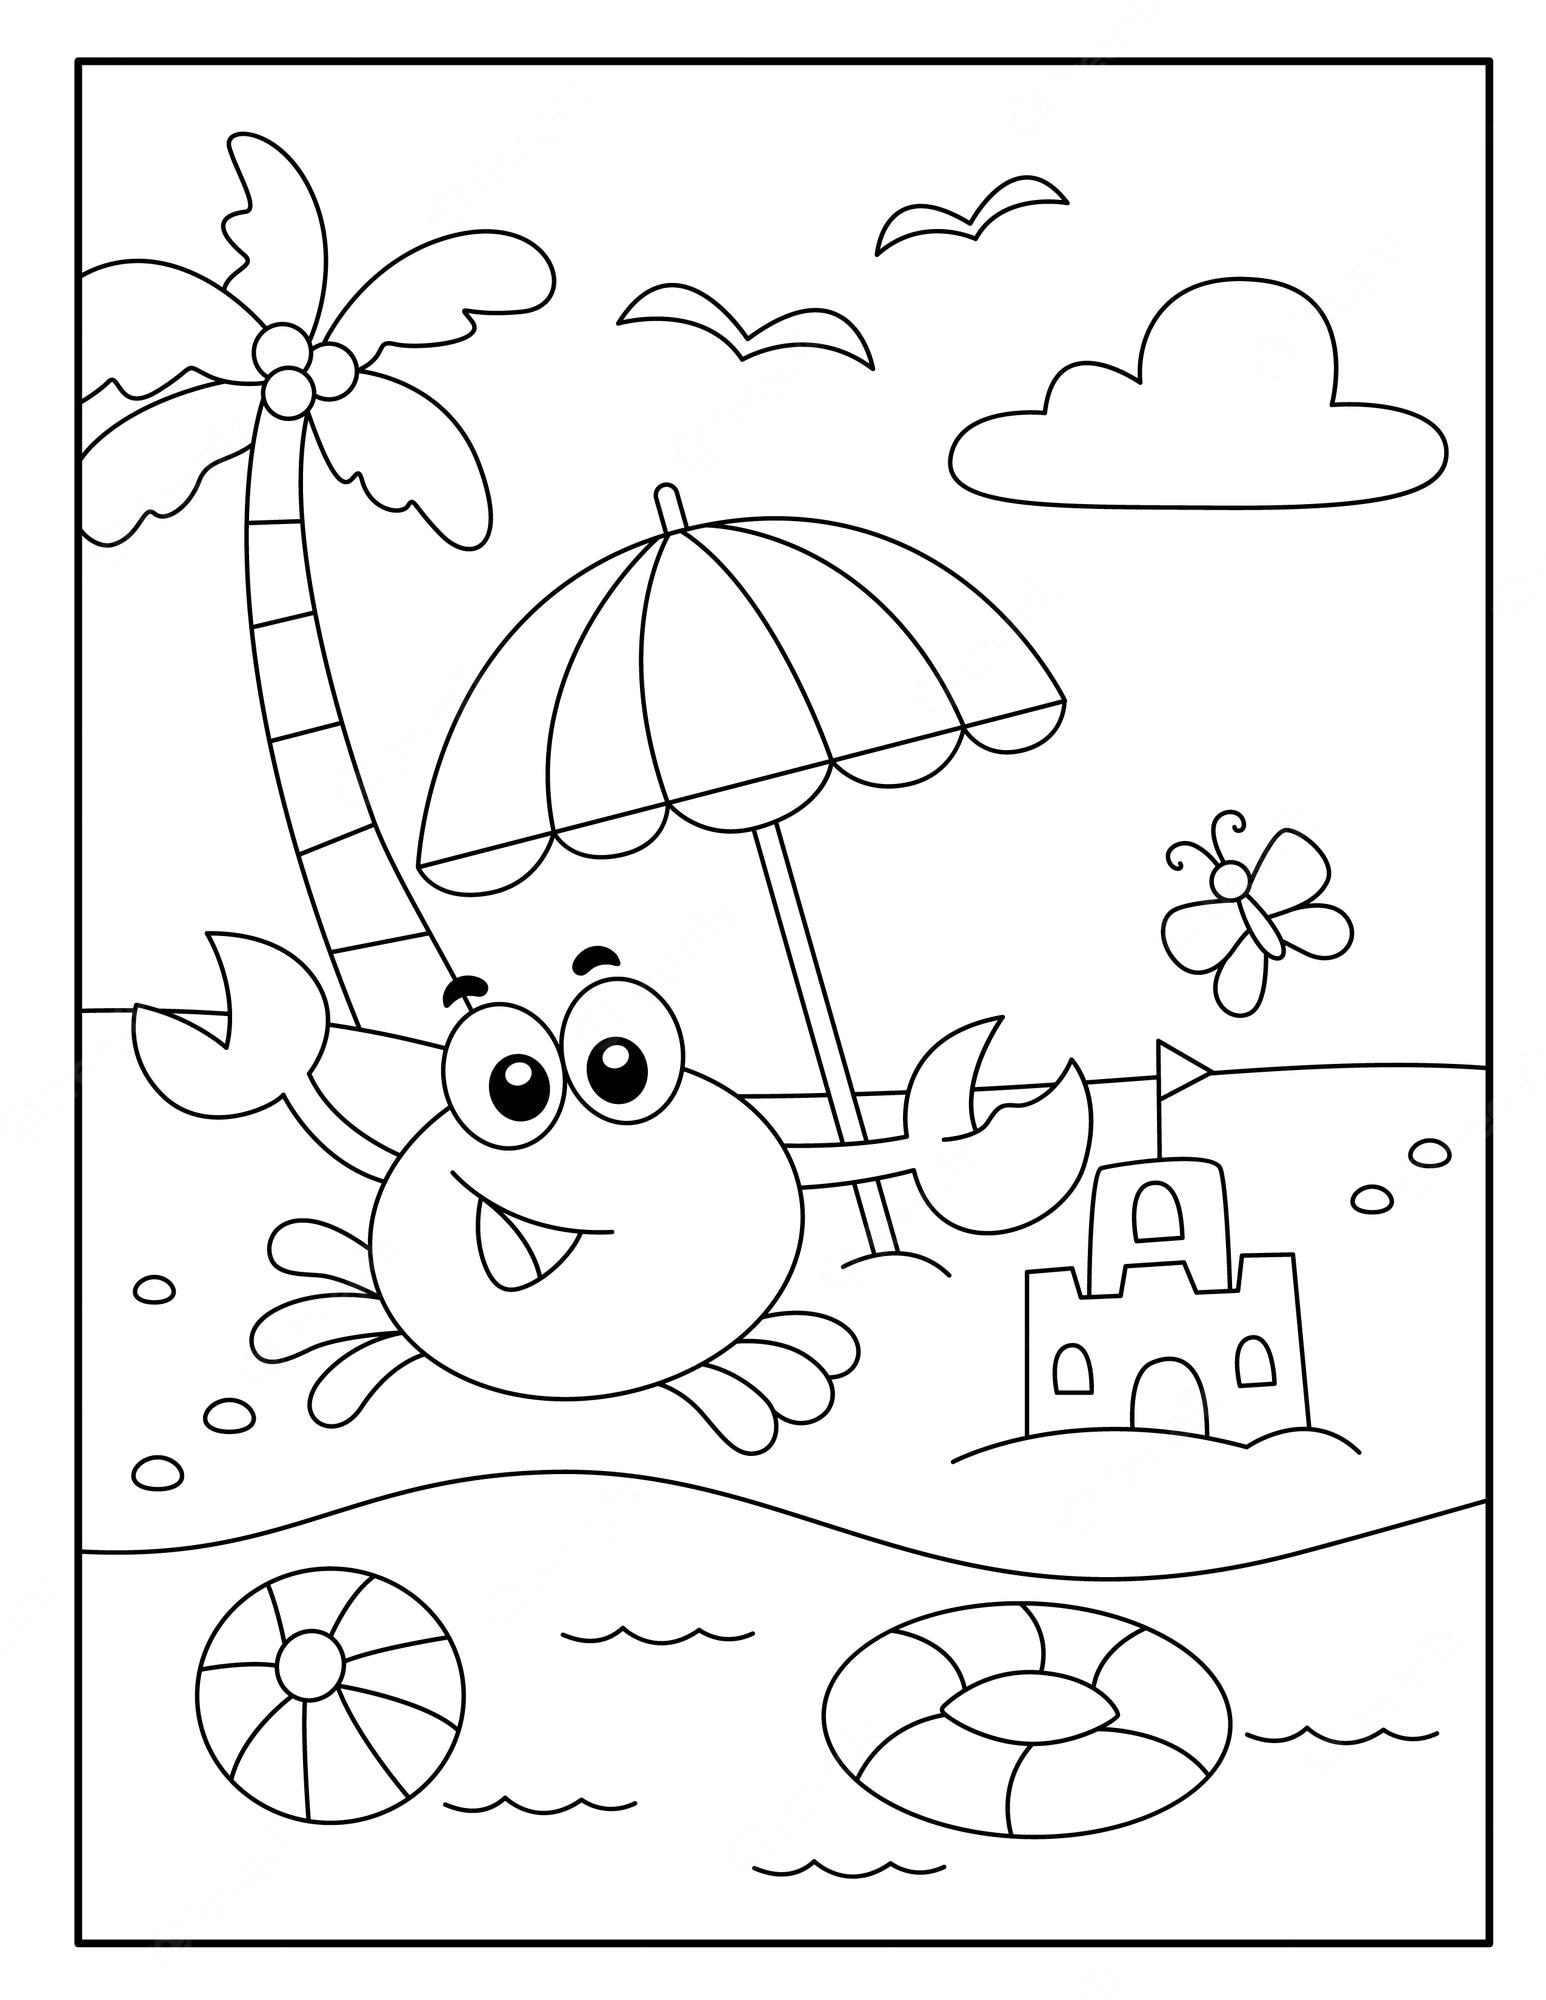 Printable Hello Summer  Book Coloring Page for kids.